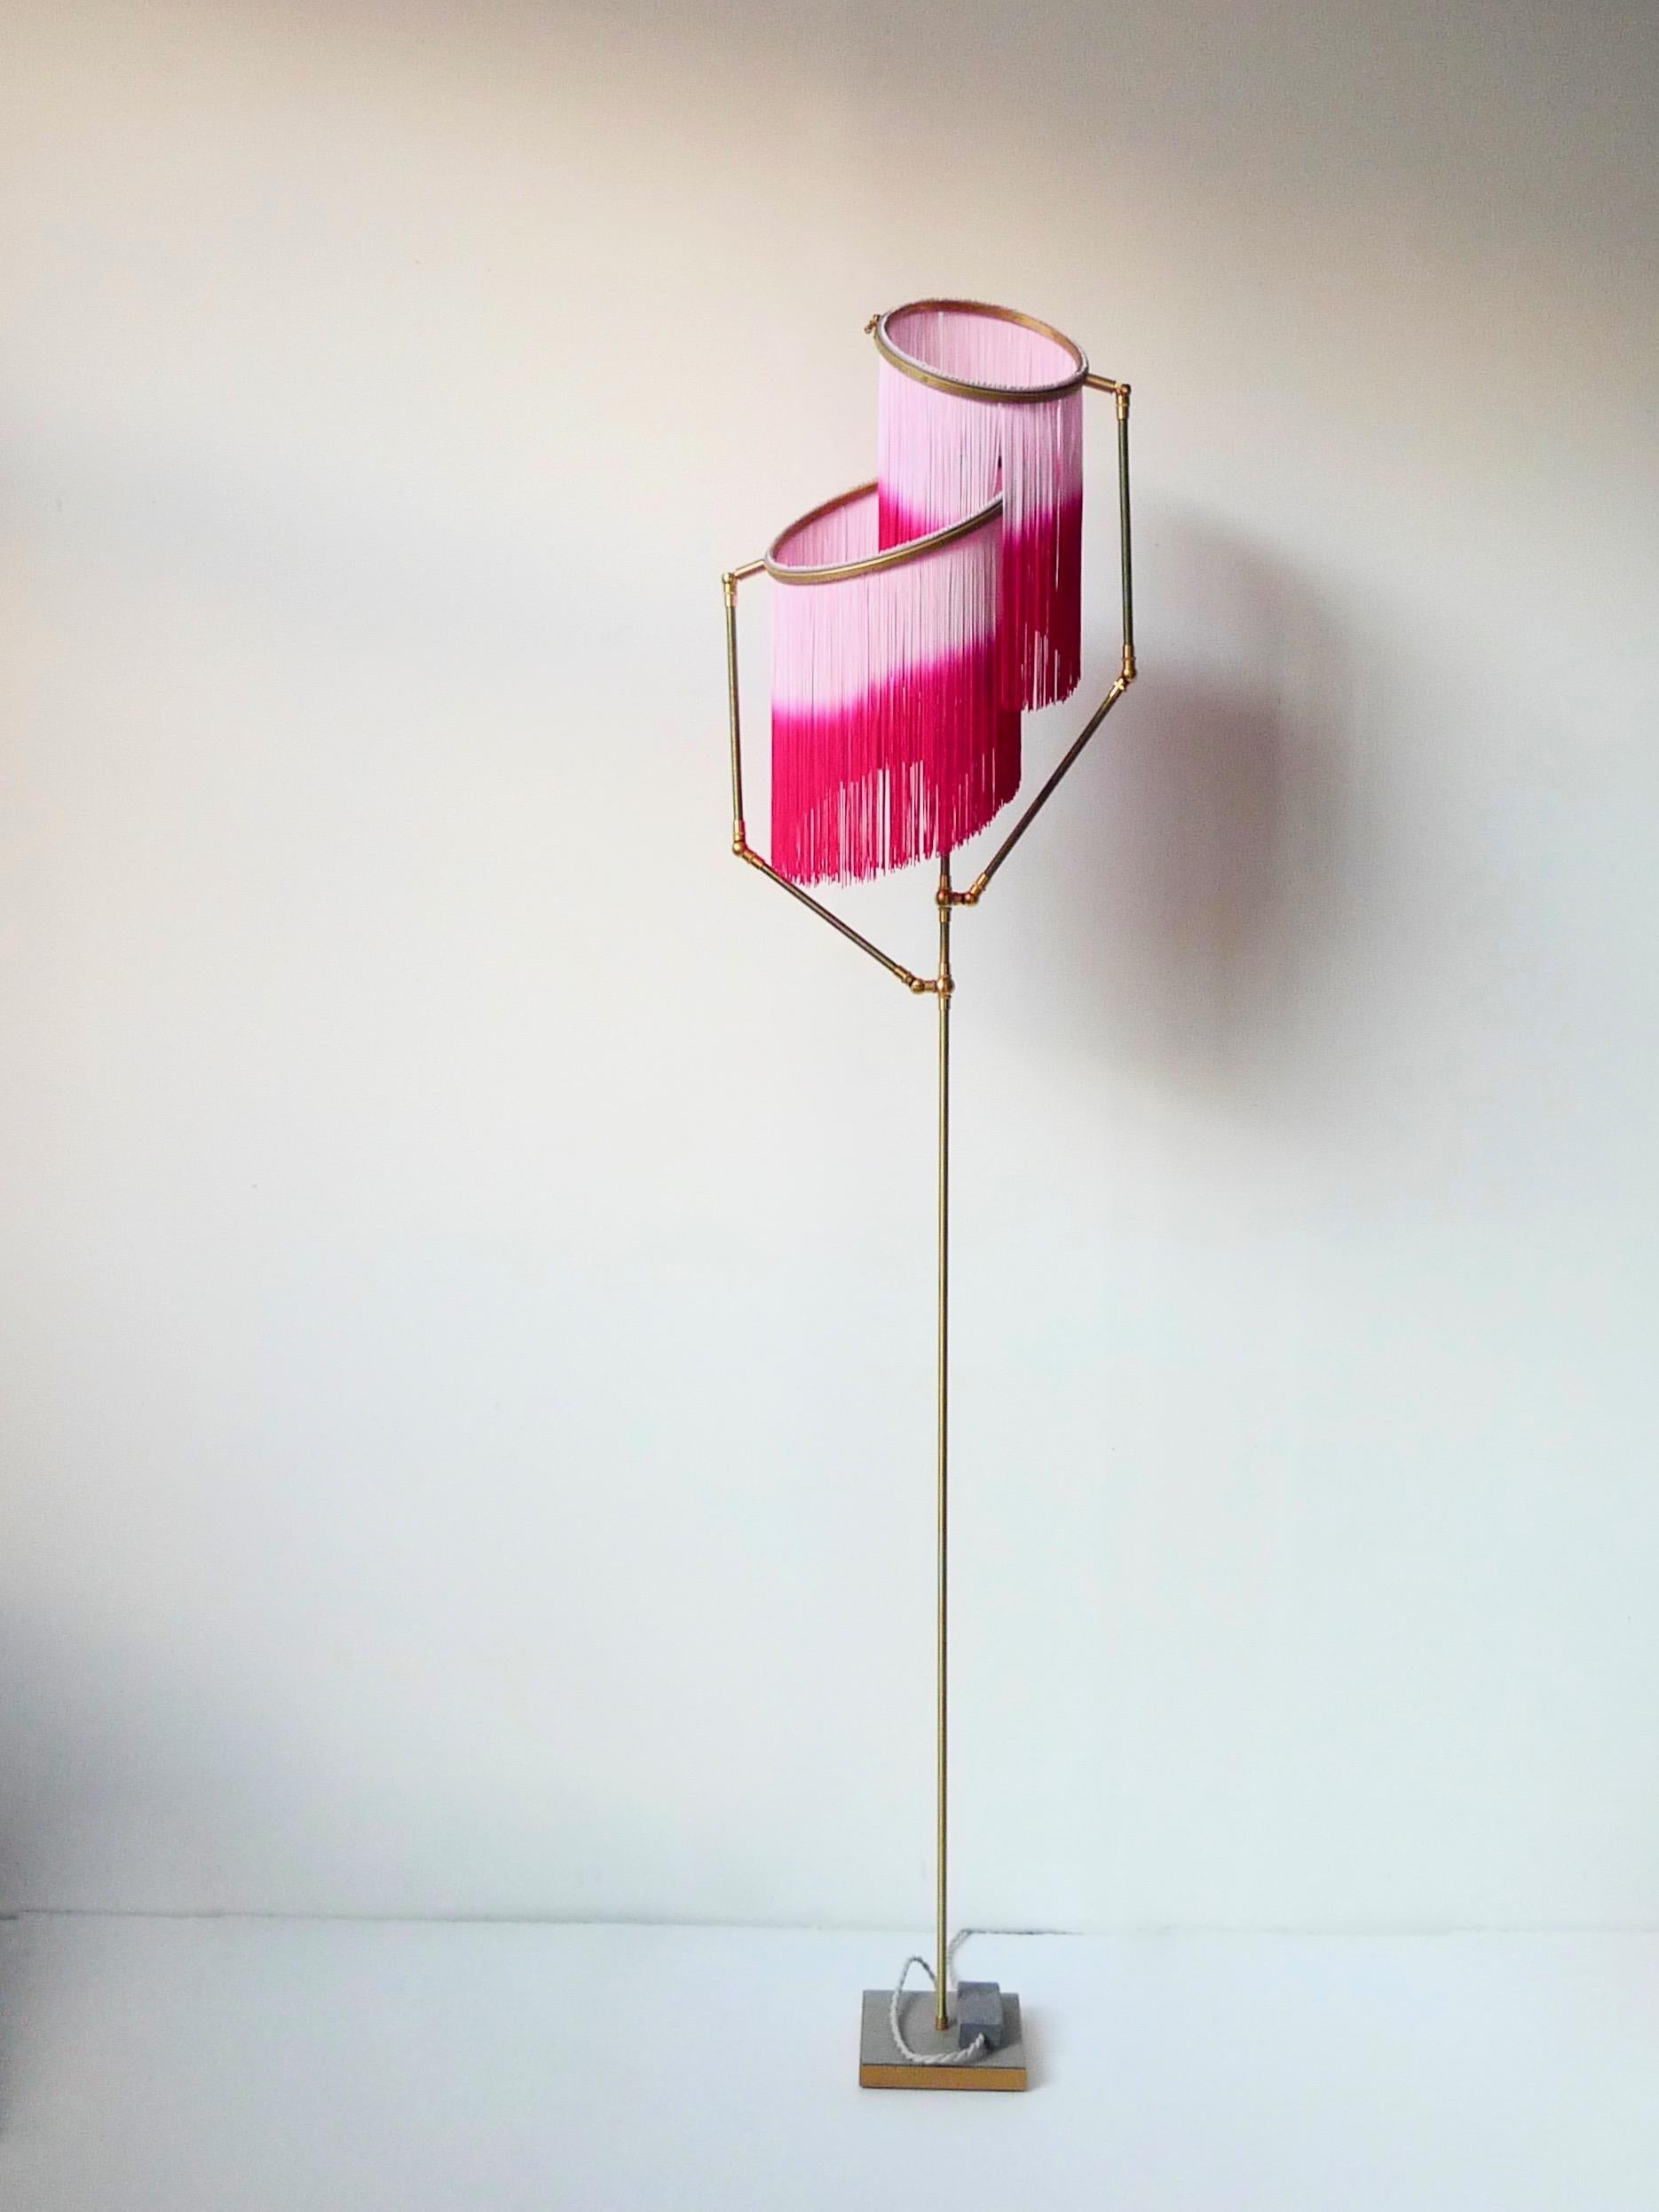 Pink charme floor lamp, Sander Bottinga

Dimensions: H 153 x W 38 x D 25 cm
Handmade in brass, leather, wood and dip dyed colored Fringes in viscose.
The movable arms makes it possible to move the circles with fringes in different positions.
So